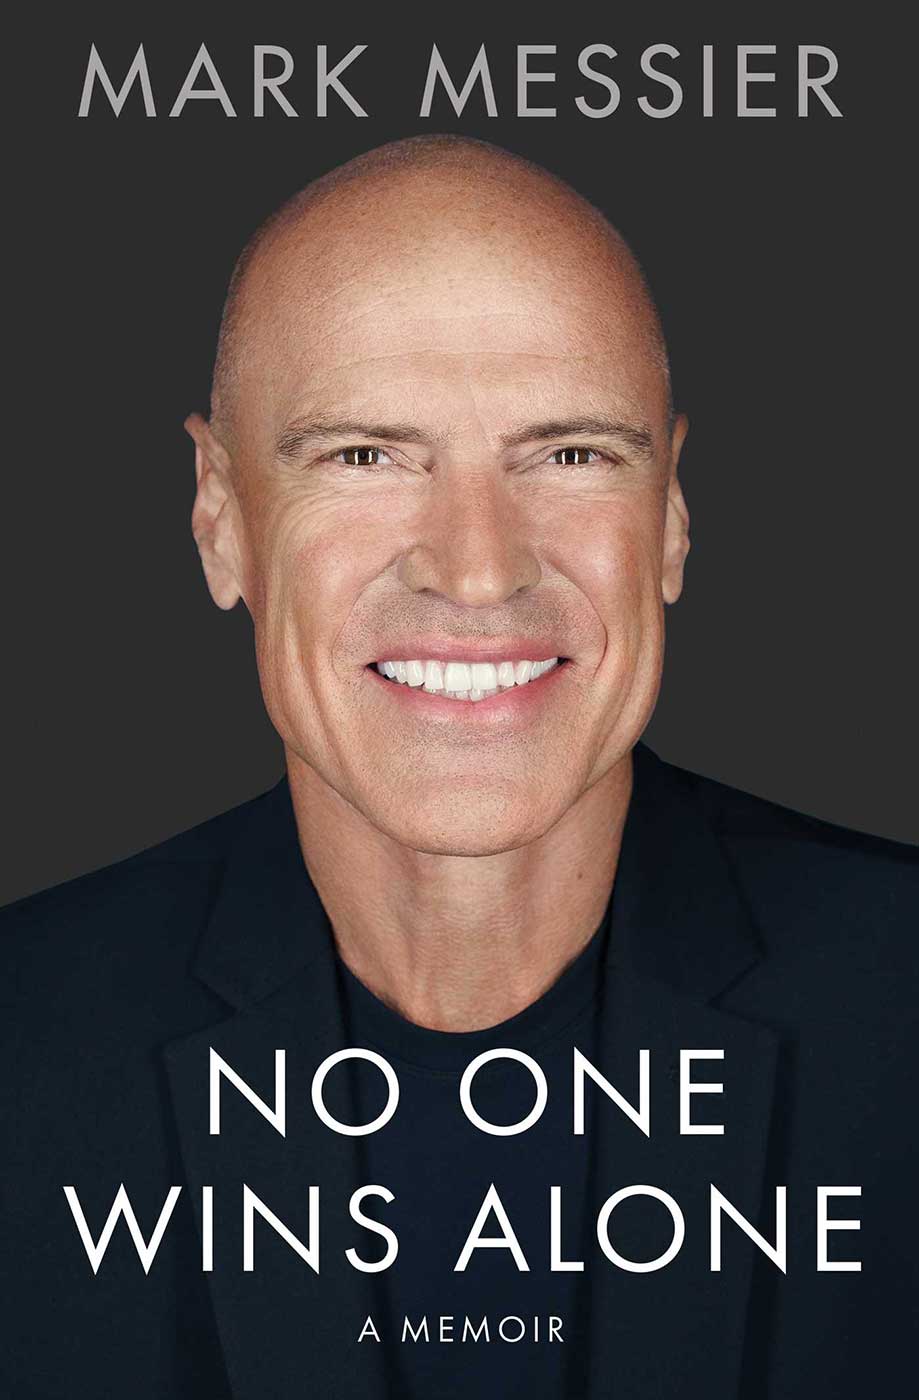 Mark Messier did it all in a career that spanned 25 NHL seasons over four decades. He’s the only player in NHL history to captain two different professional teams to championships; he won five Stanley Cups with the Edmonton Oilers and one with the New York Rangers—all in a span of 10 years.